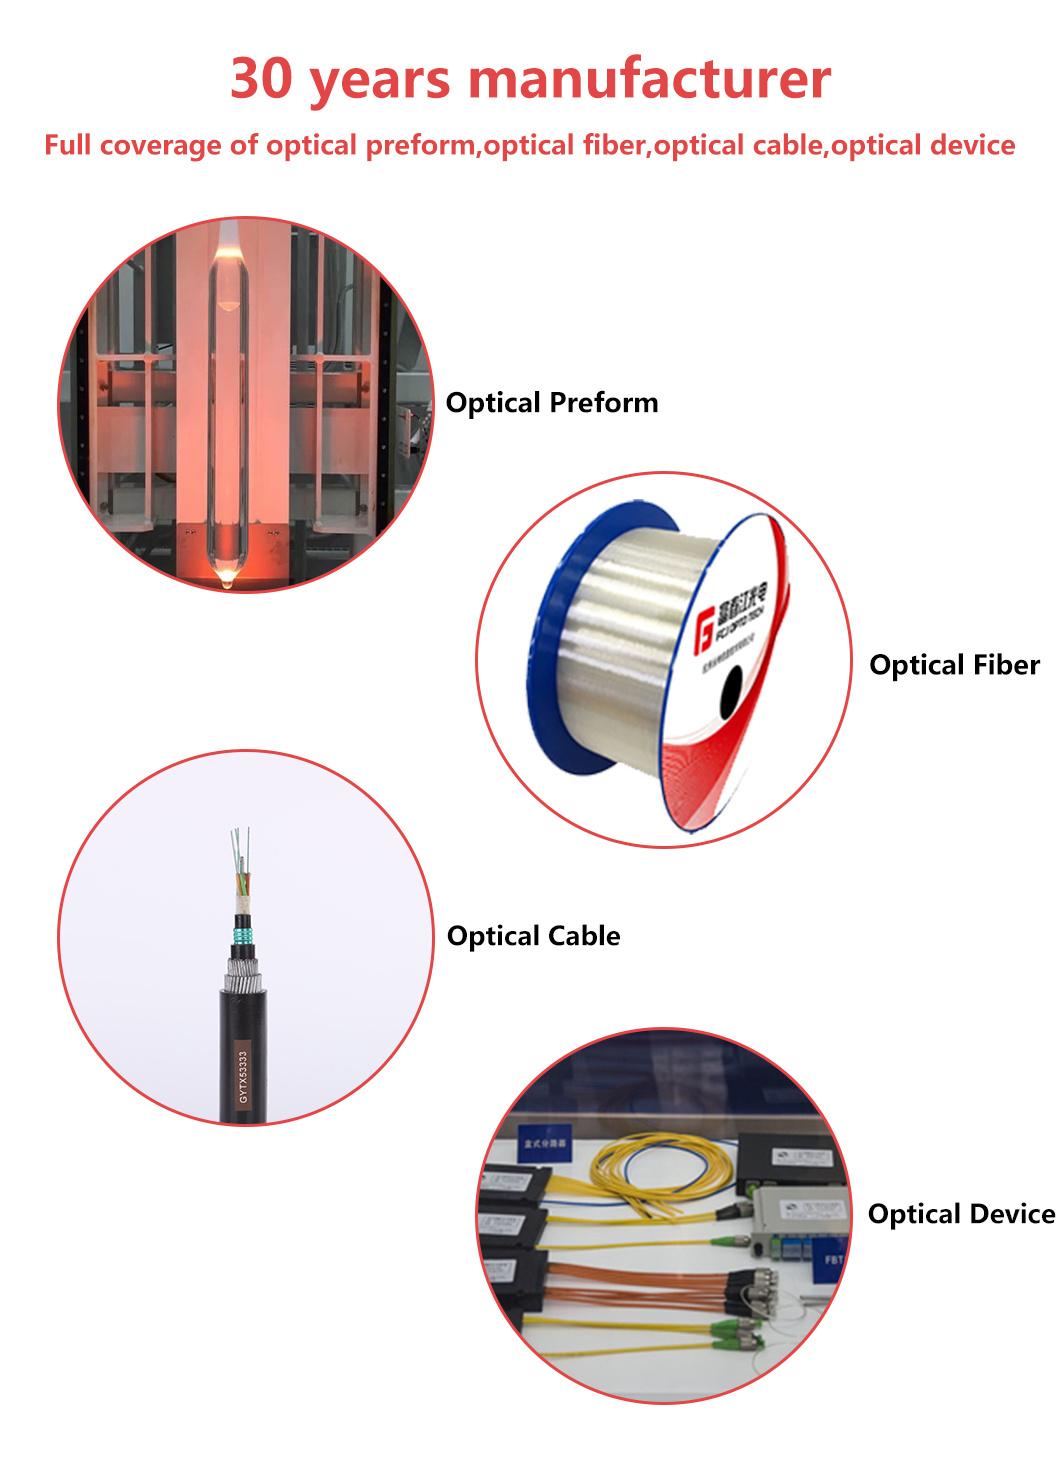 All Dieletric Self-Supporting Fiber Optical Otdoor Cable/ All Dielectric Cable ADSS